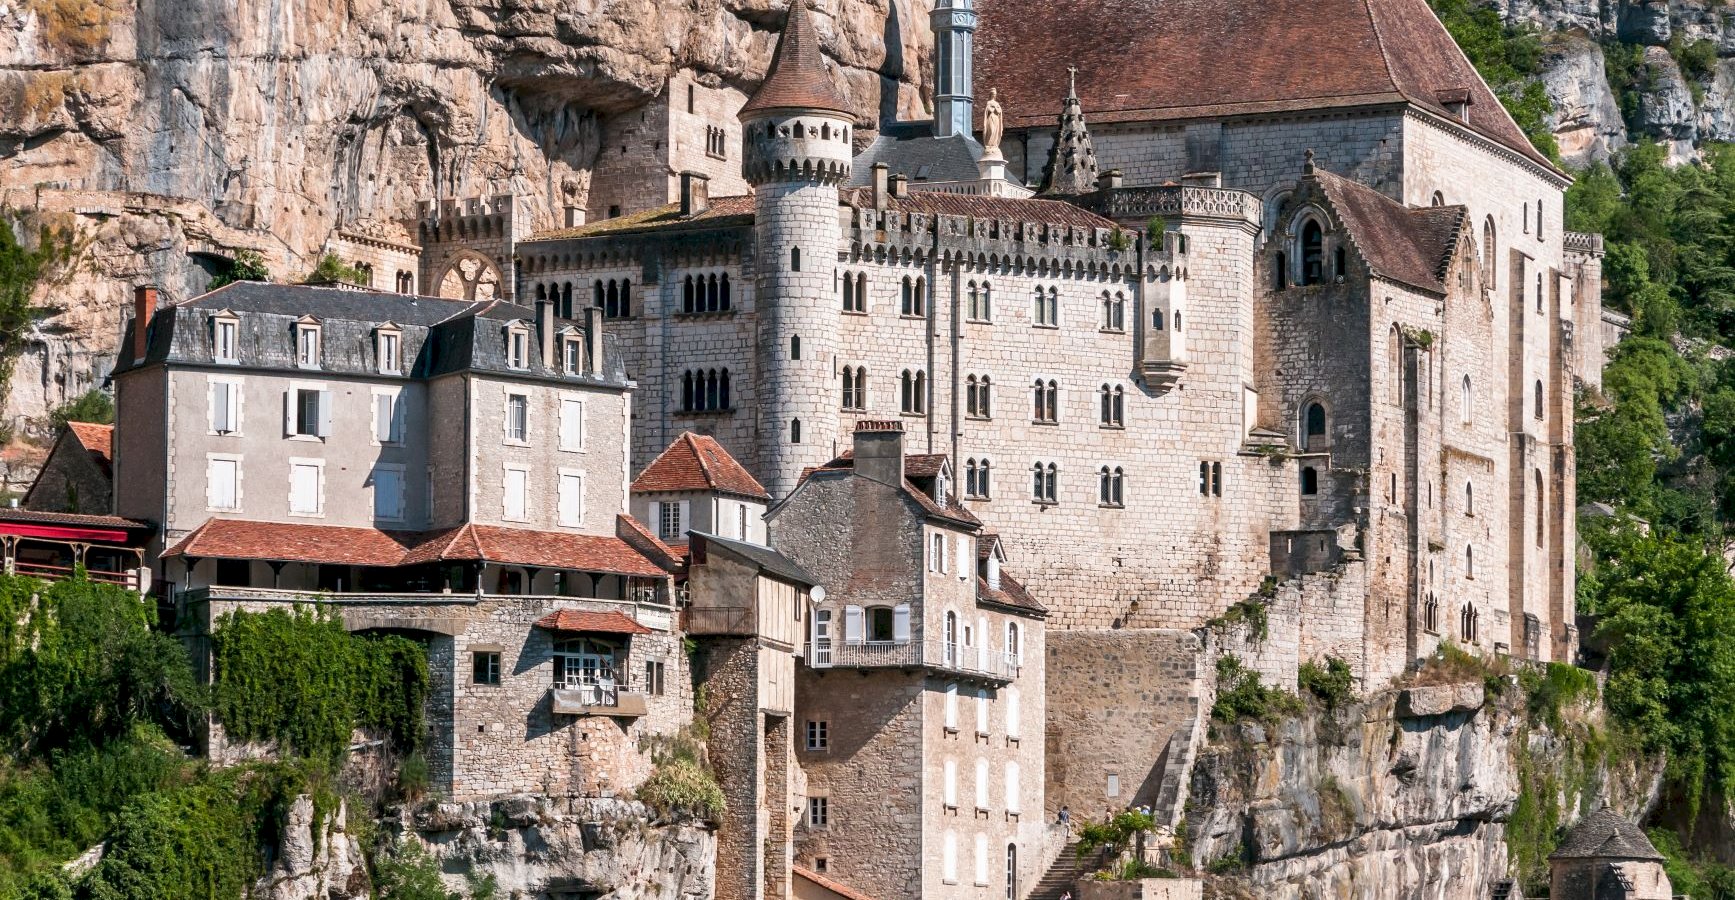 Ophorus Tours - A Half Day Trip from Sarlat to Rocamadour village